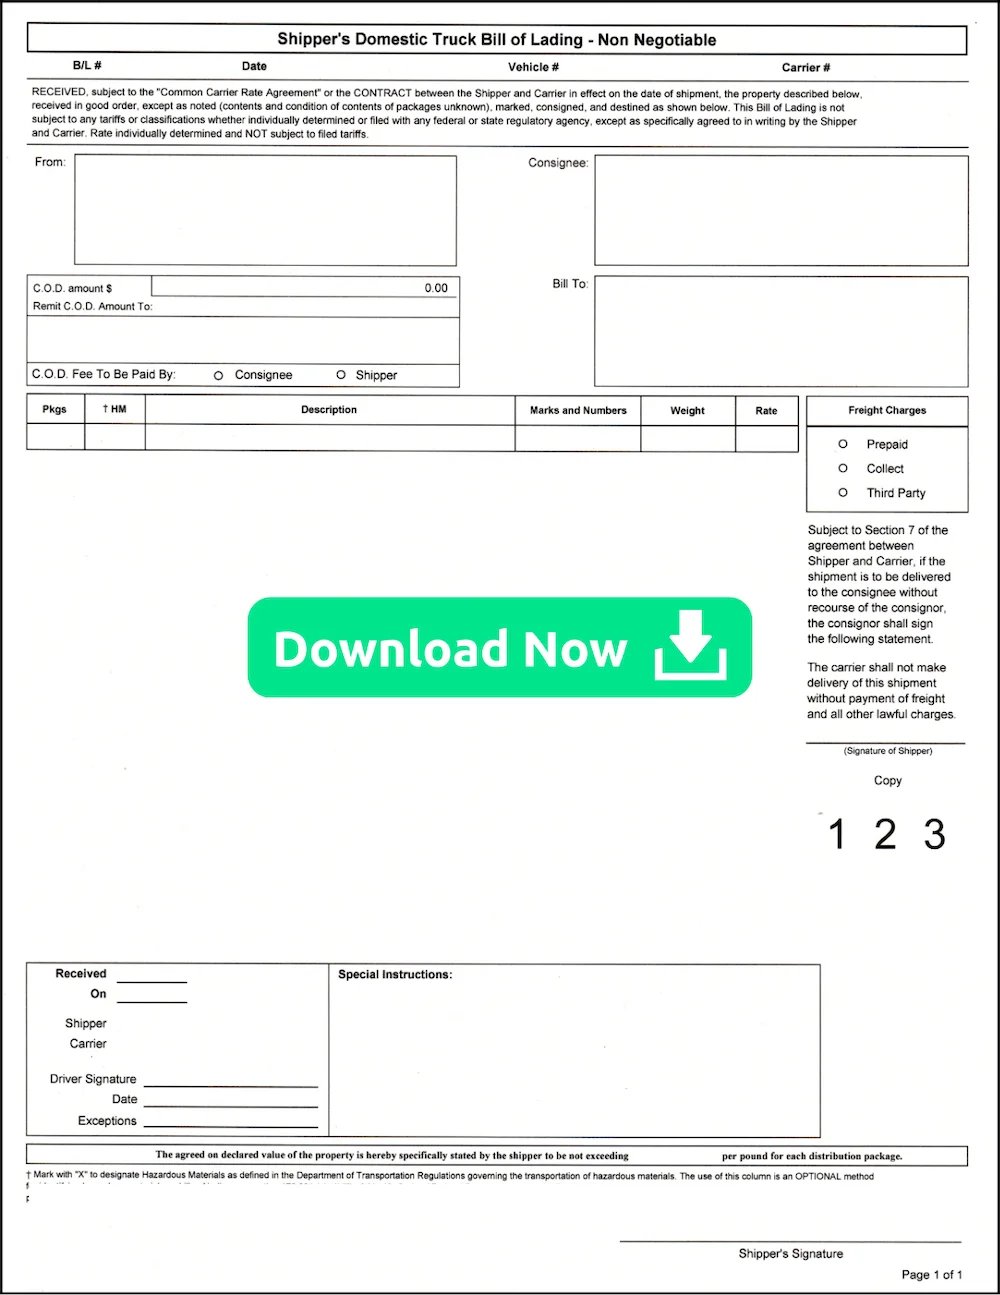 Inland Bill of Lading | Download Now